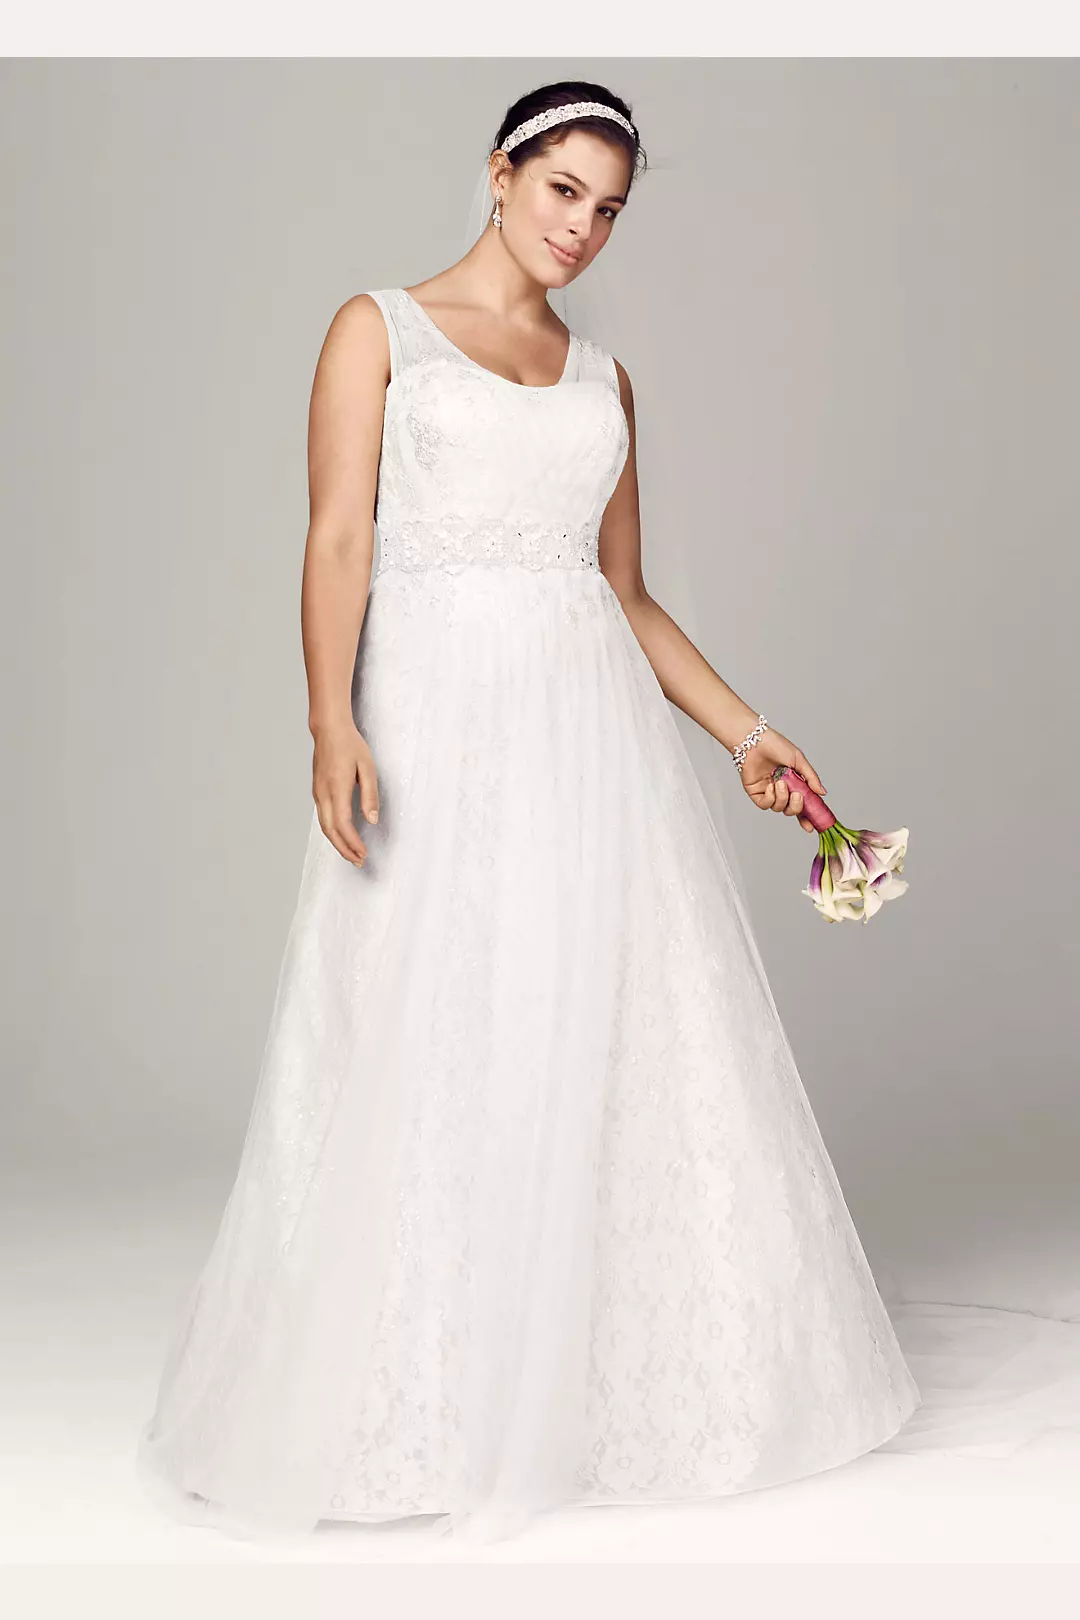 Oleg Cassini Tank Wedding Dress with Lace Accents Image